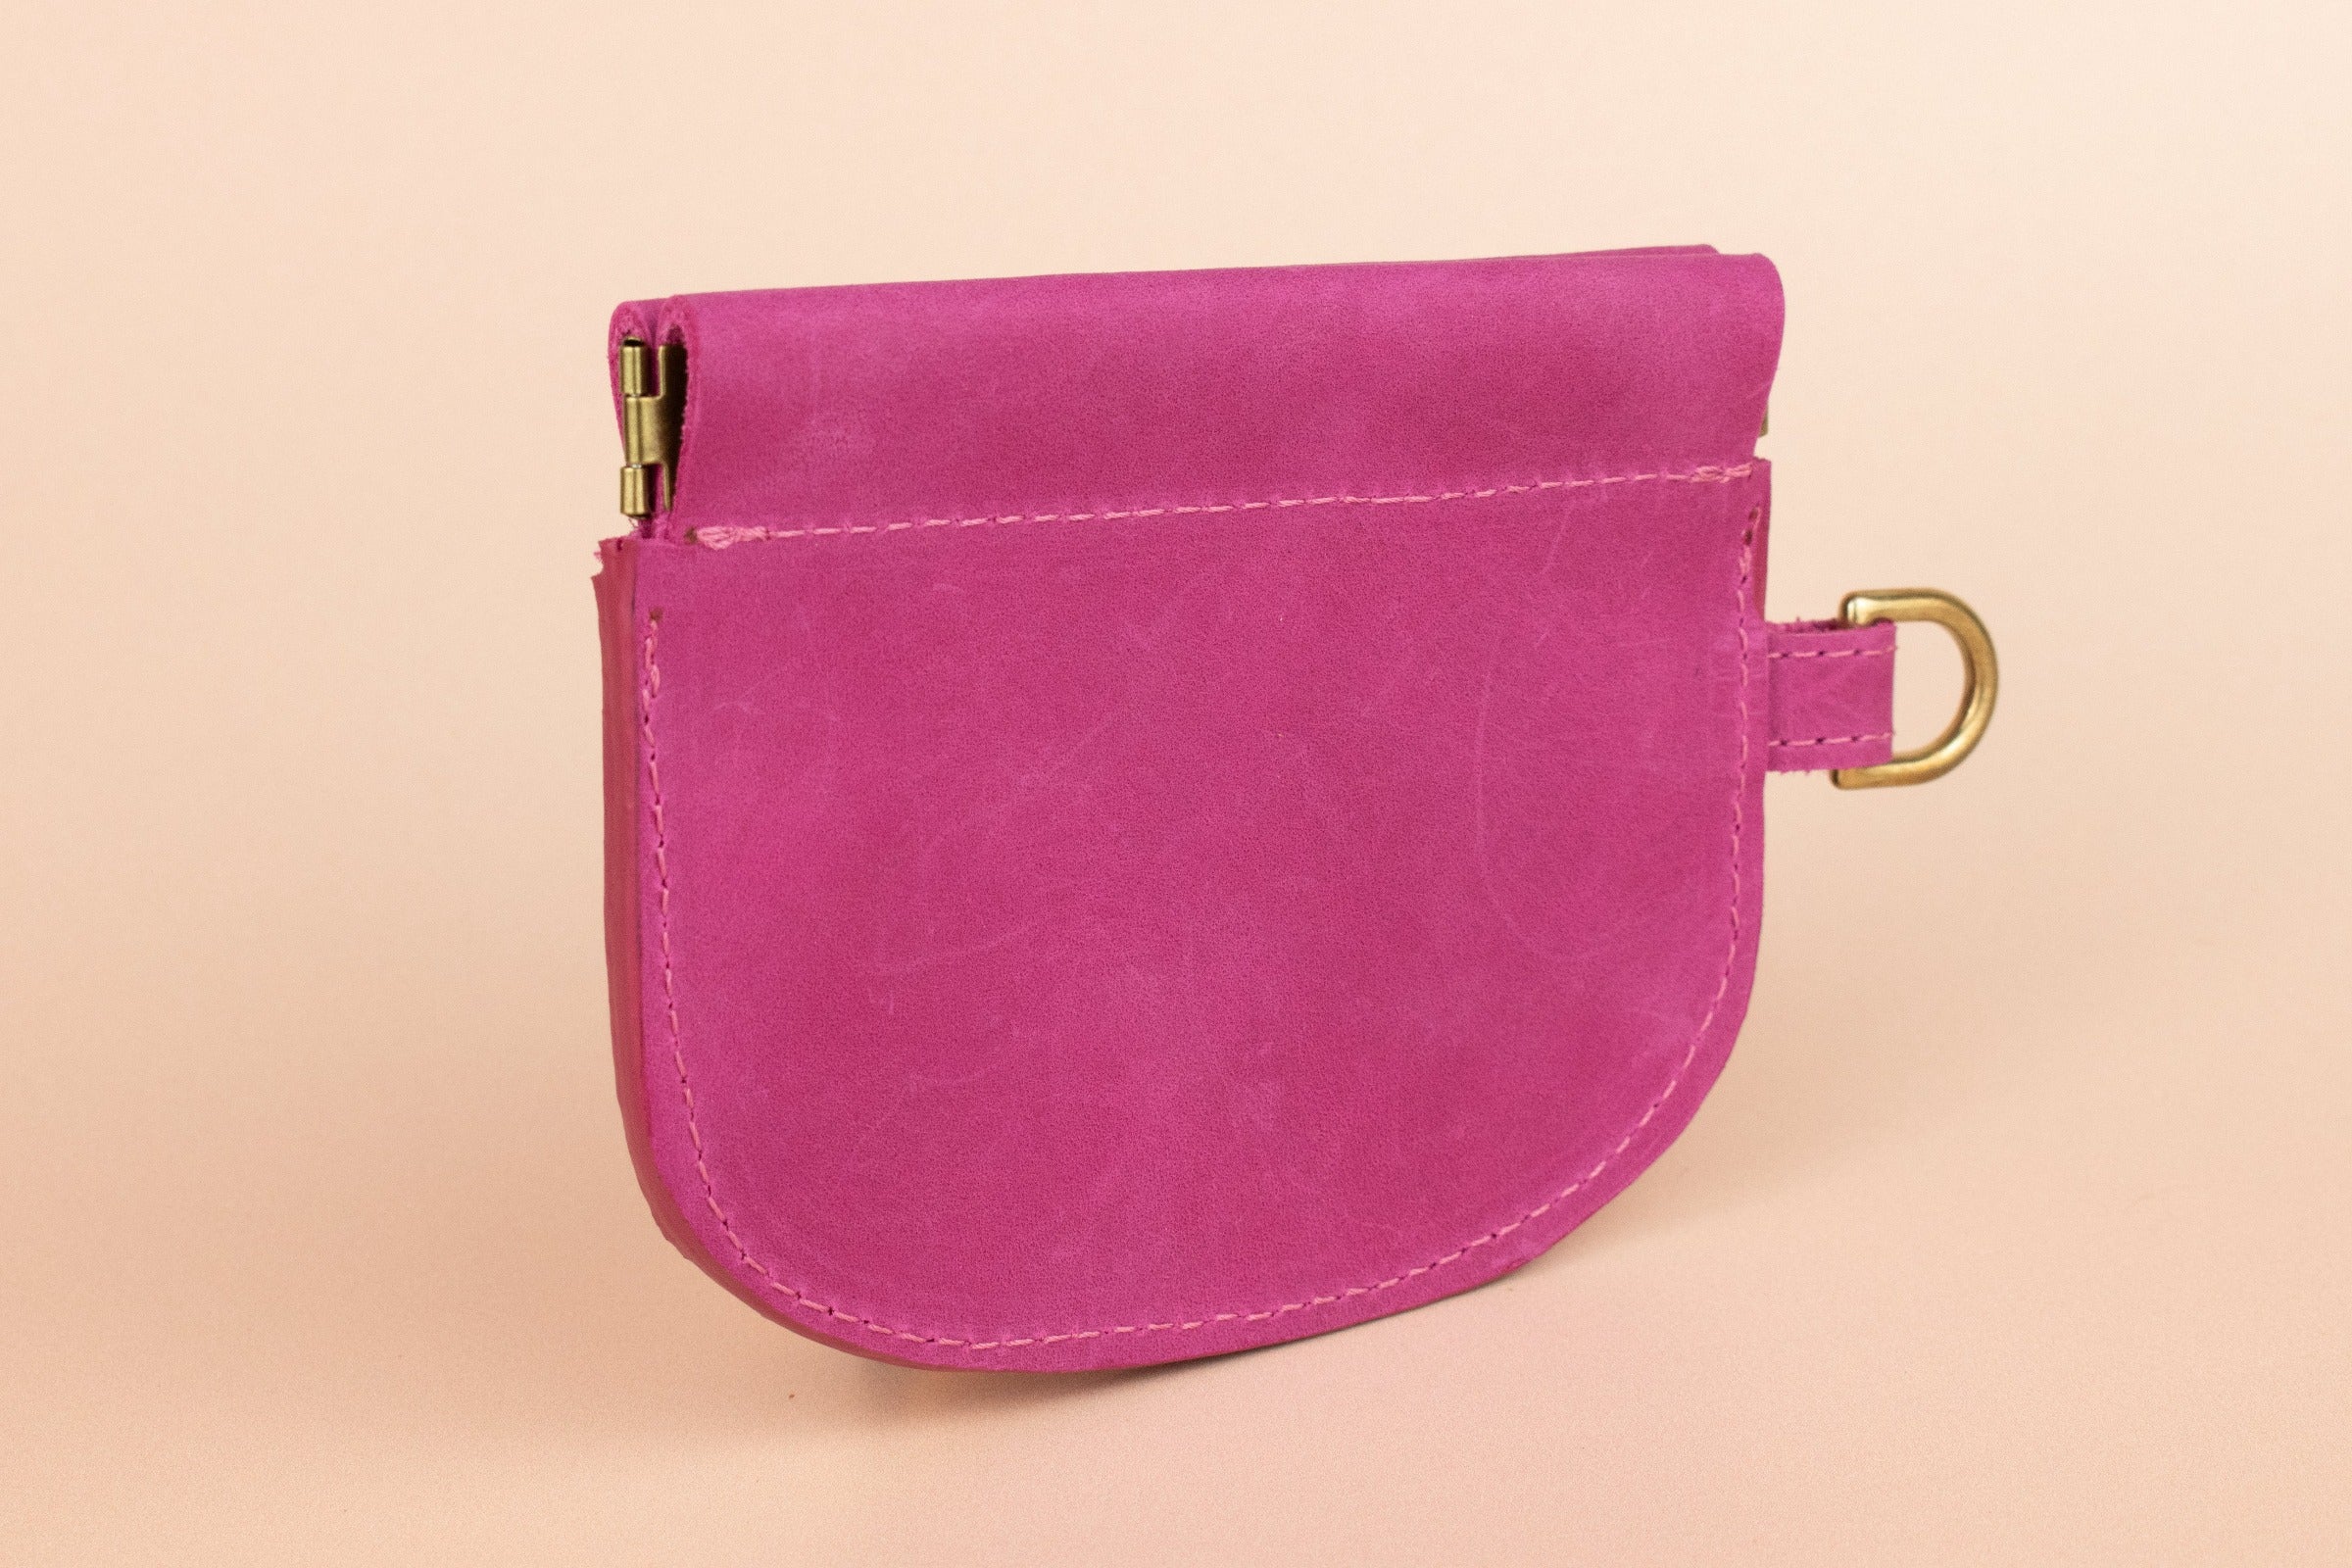 slim handmade nubuck leather wallet card case in magenta pink, squeeze clasp closure